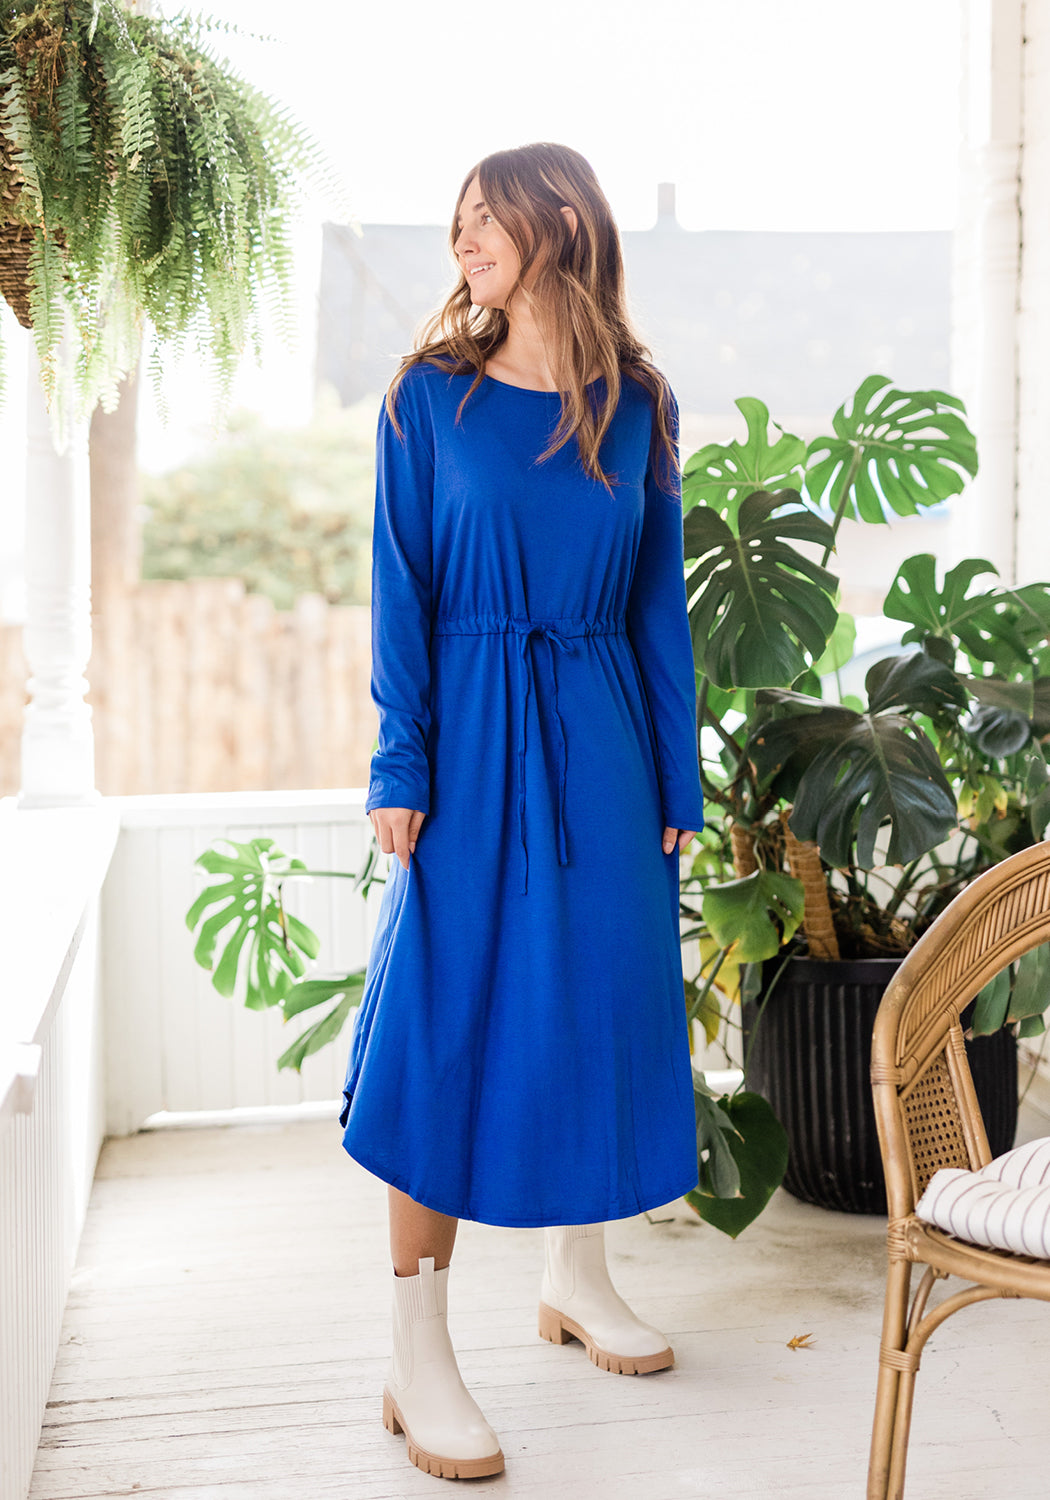 'Rae' Round Neck Solid Long Sleeve Dress in Royal Blue | final sale